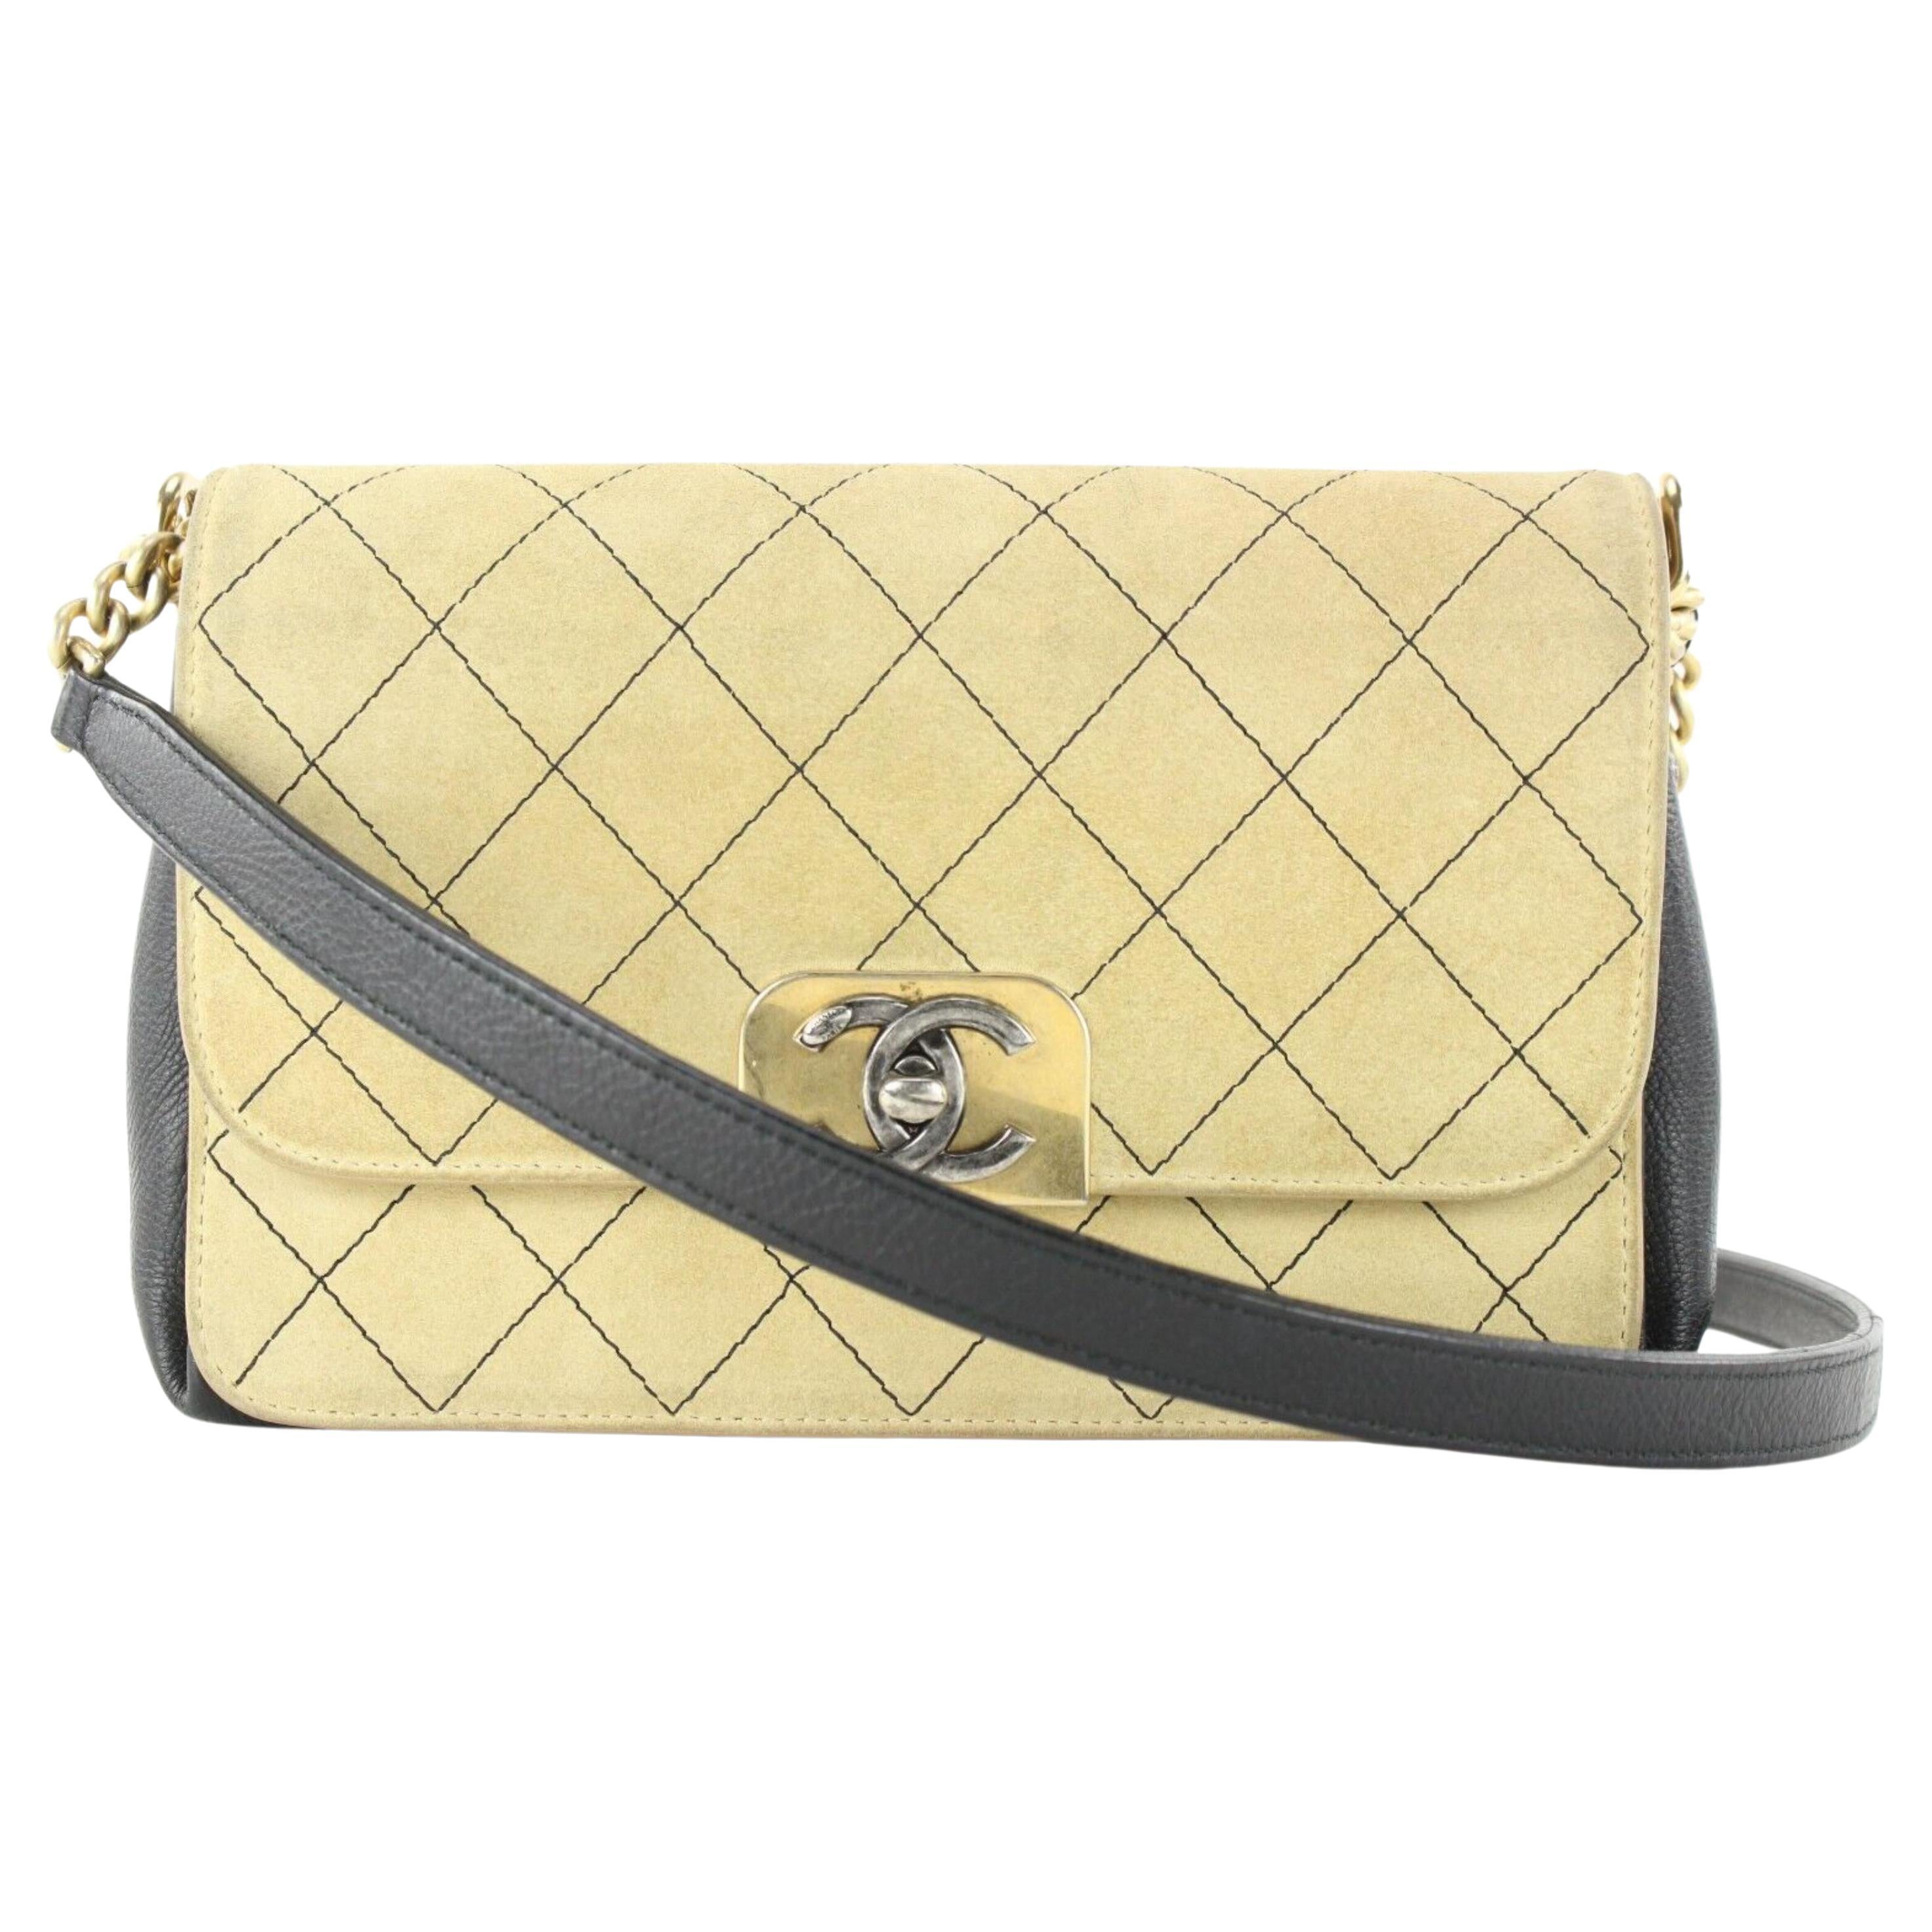 Chanel Beige Quilted Suede x Black Leather Classic Flap Bag 2CC1202 For Sale